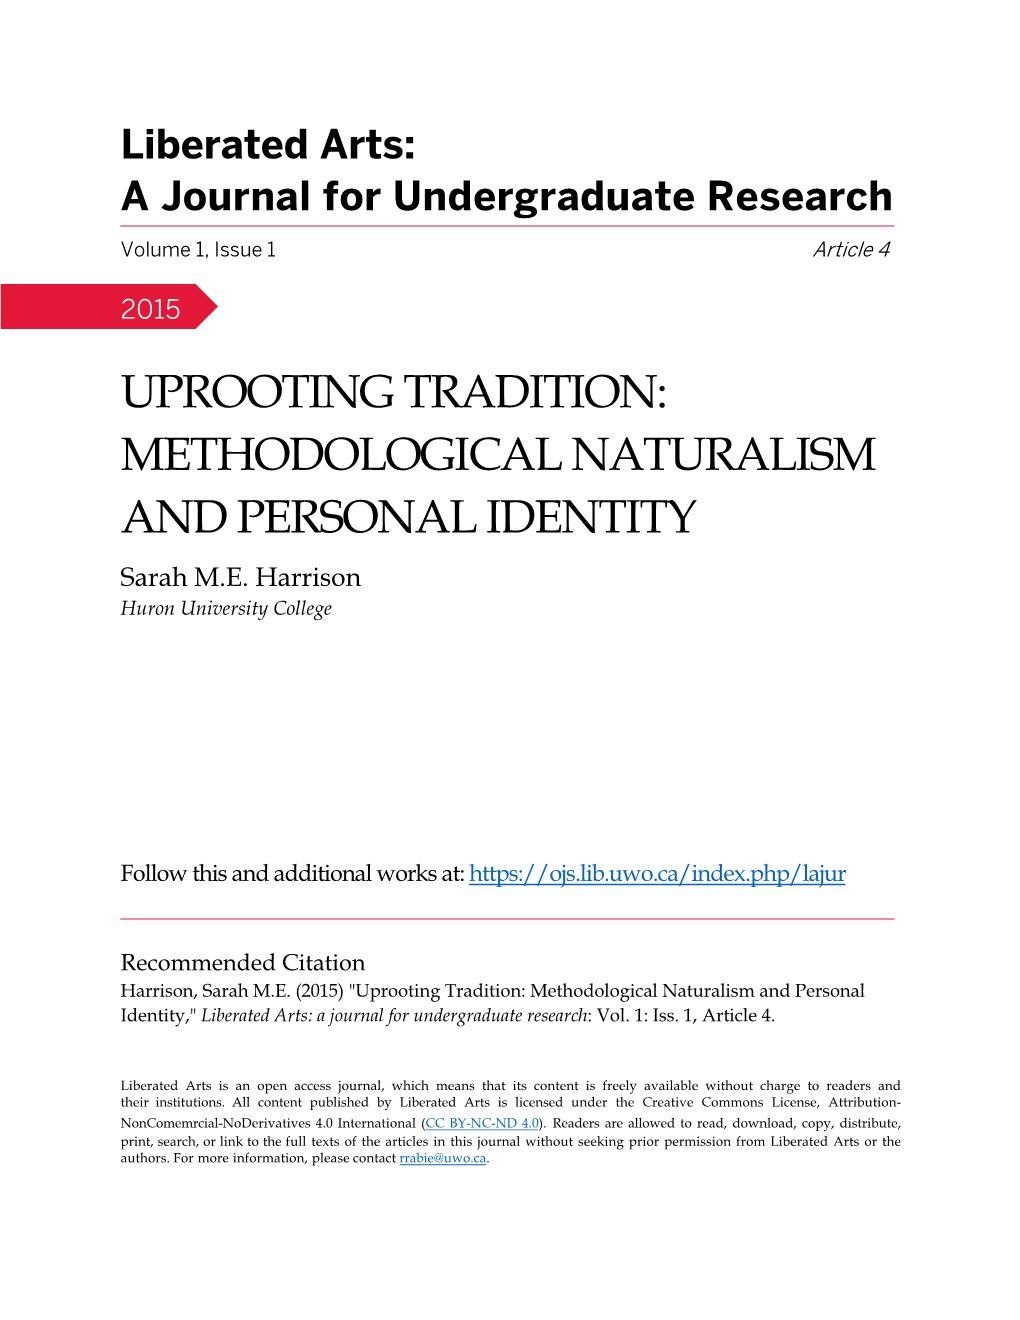 METHODOLOGICAL NATURALISM and PERSONAL IDENTITY Sarah M.E